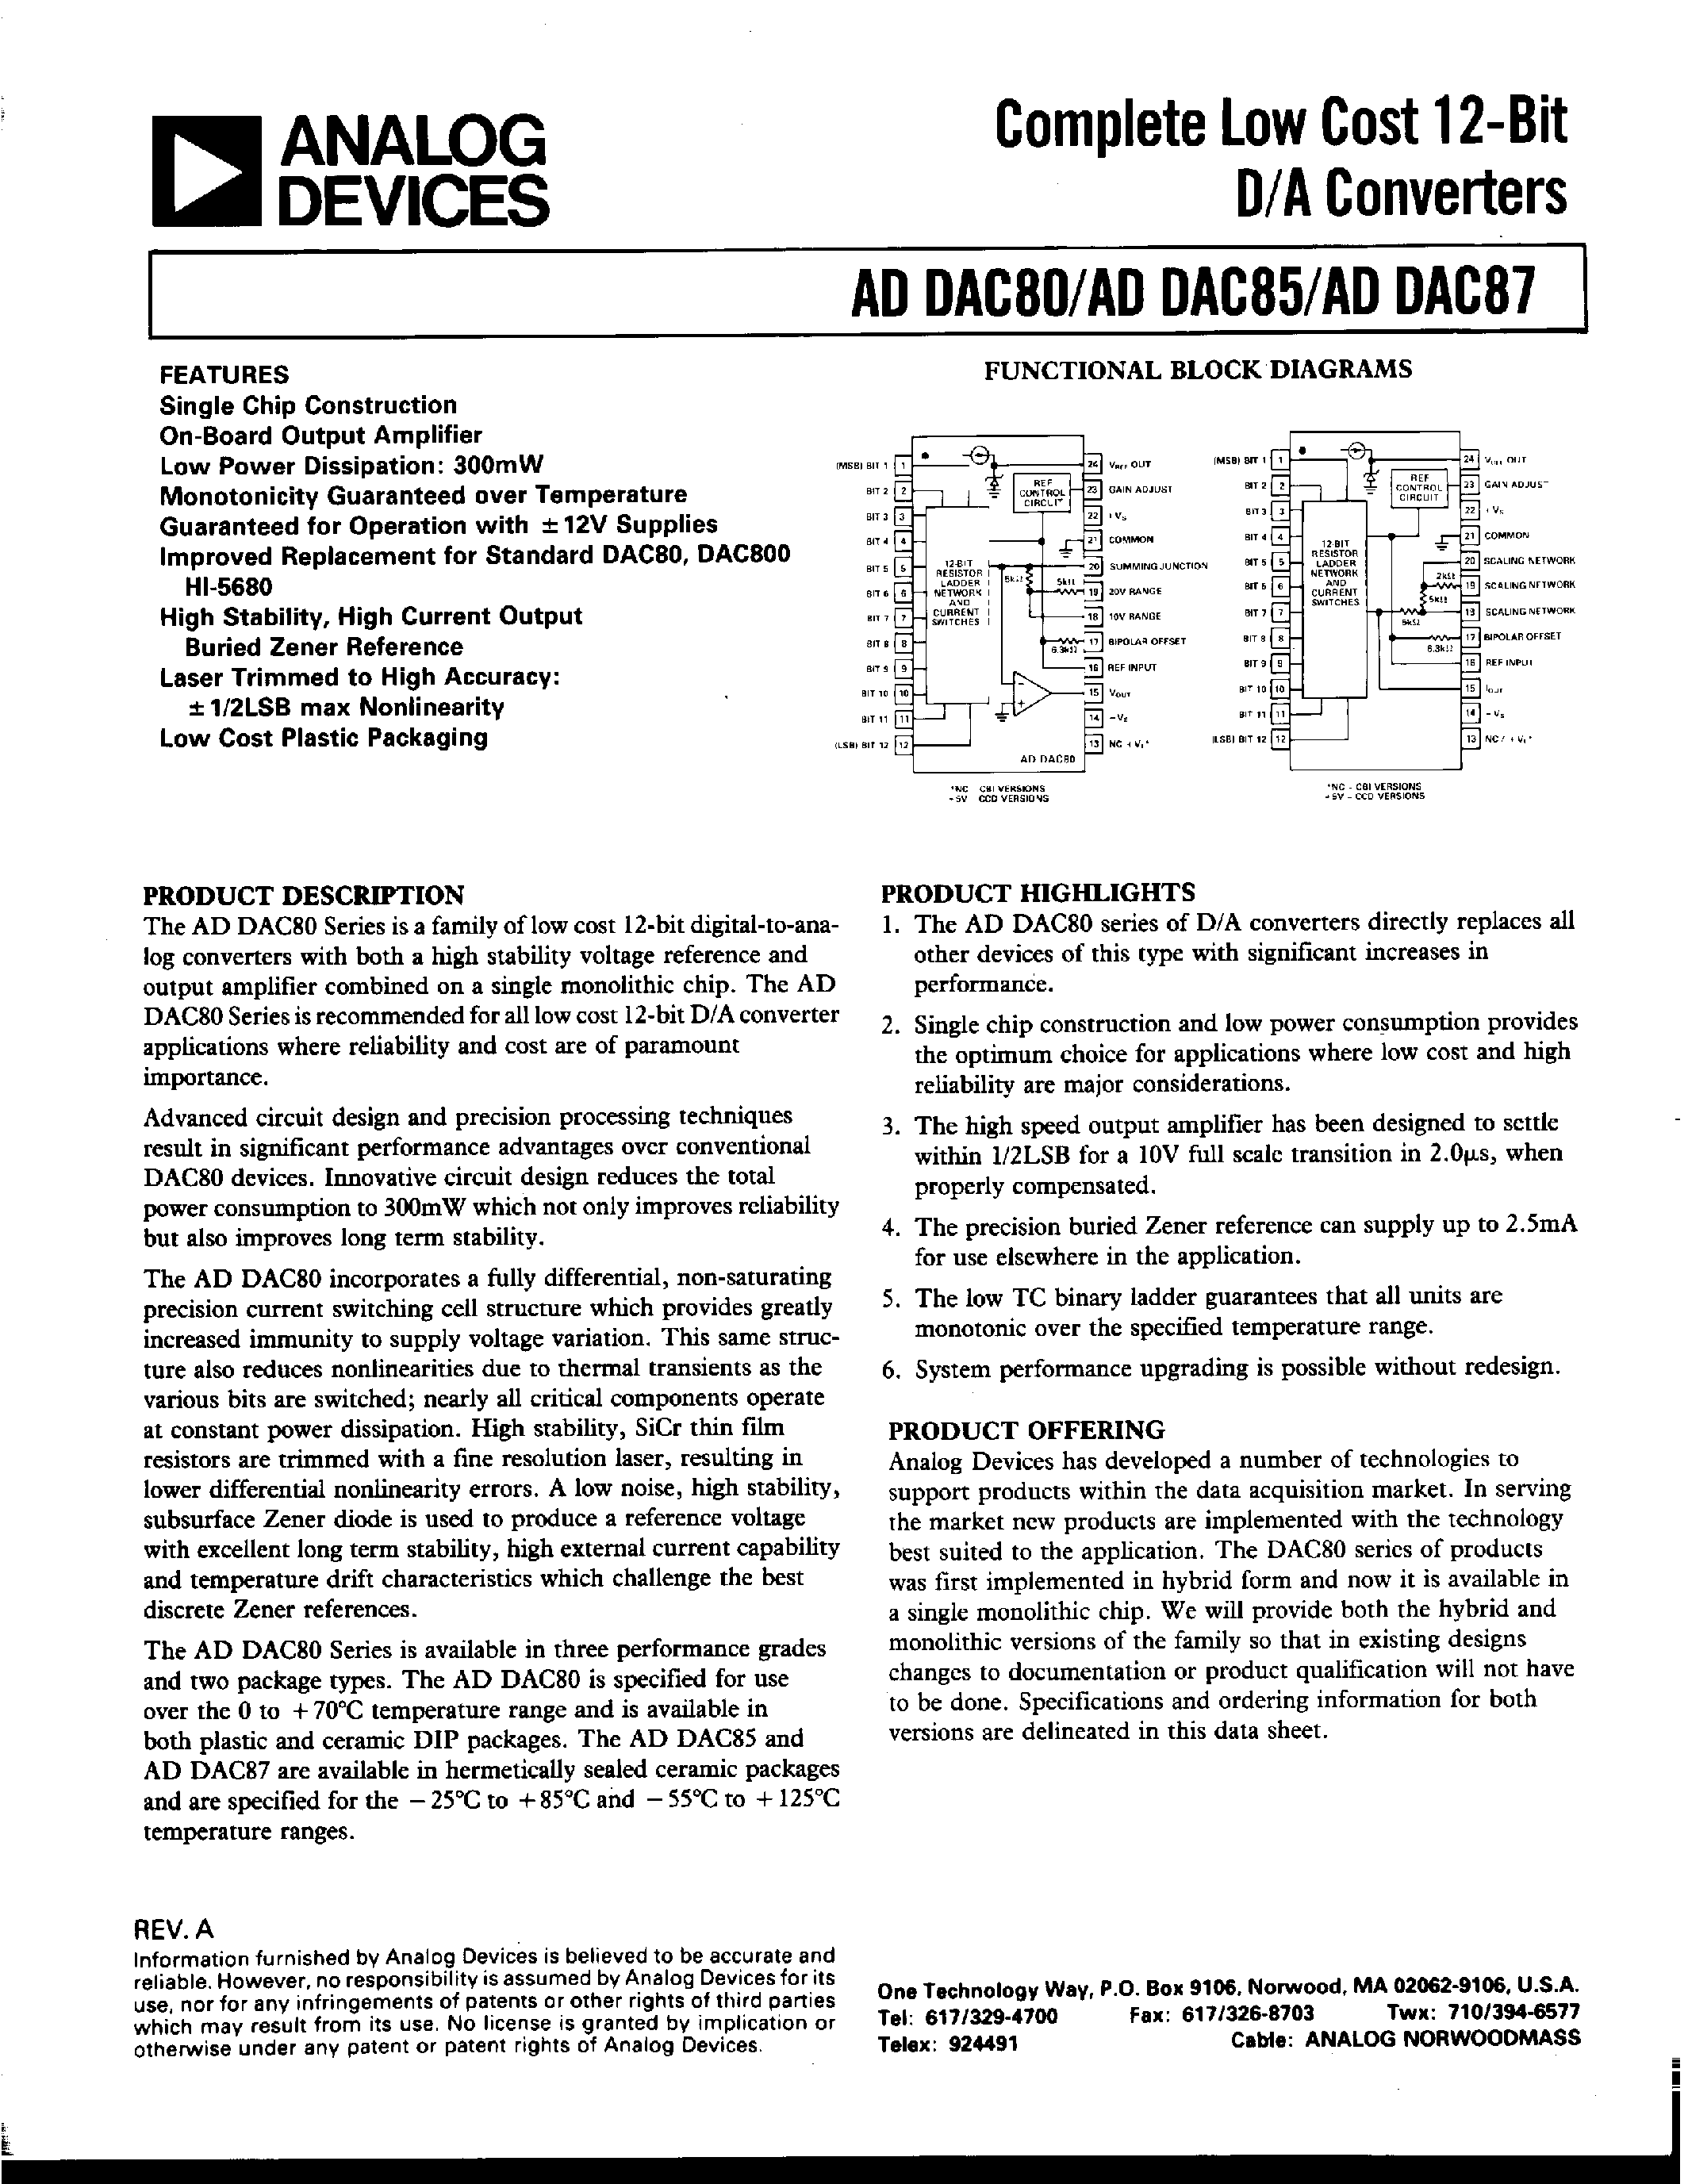 Datasheet ADDAC80N-CBI-V - COMPLETE LOW COST 12-BIT D/A CONVERTERS page 1